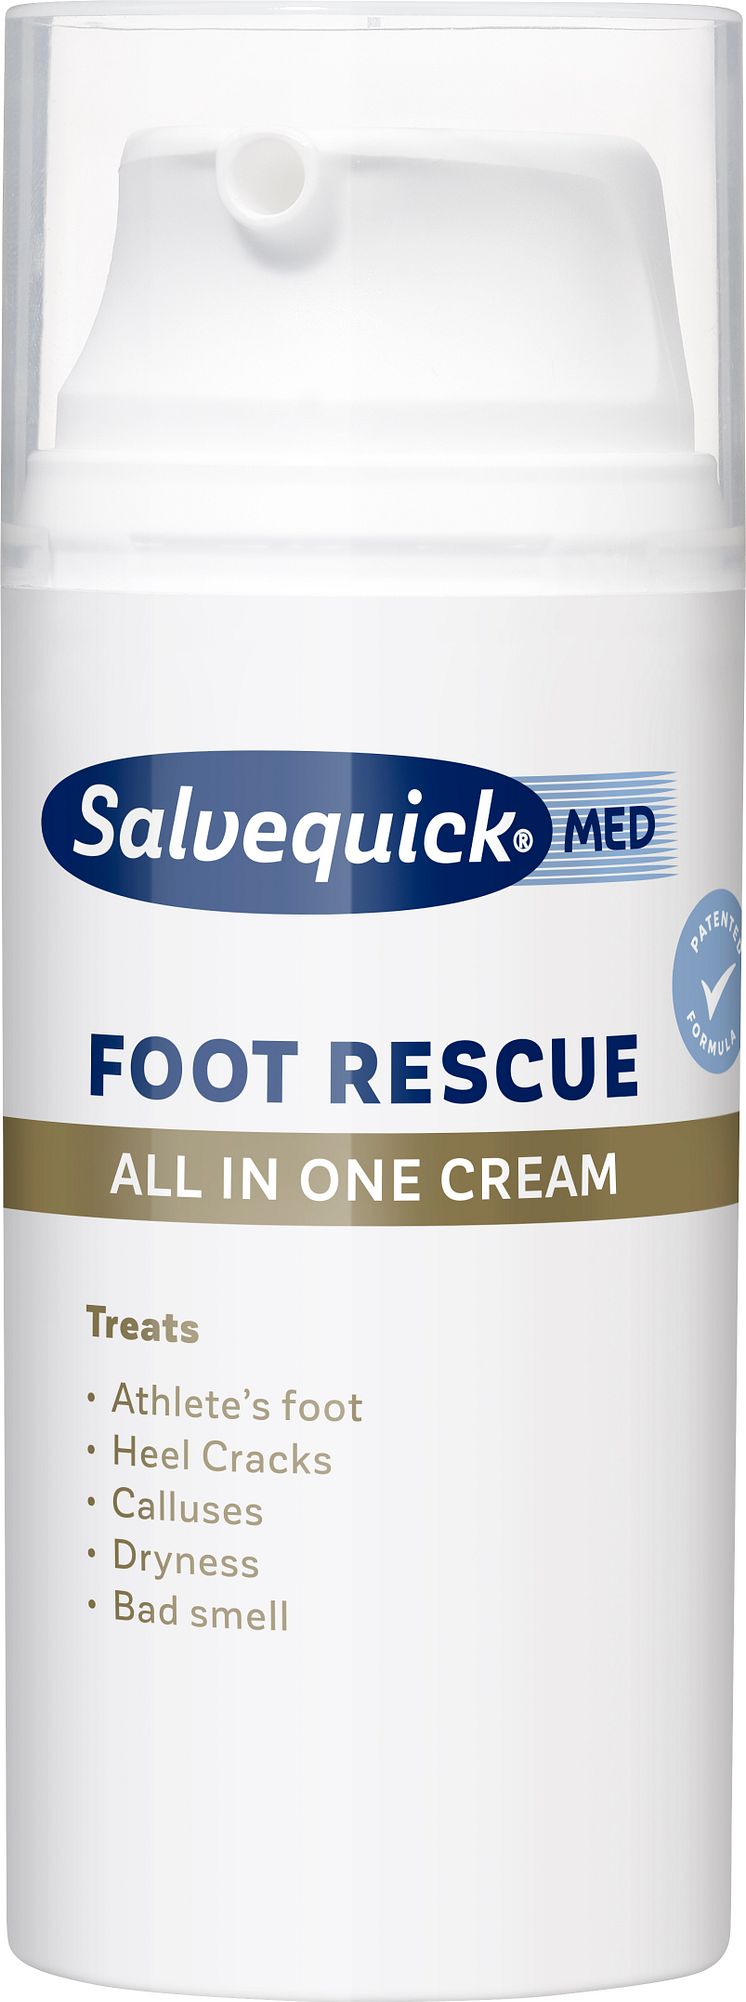 Salvequick Foot Rescue All in One Cream